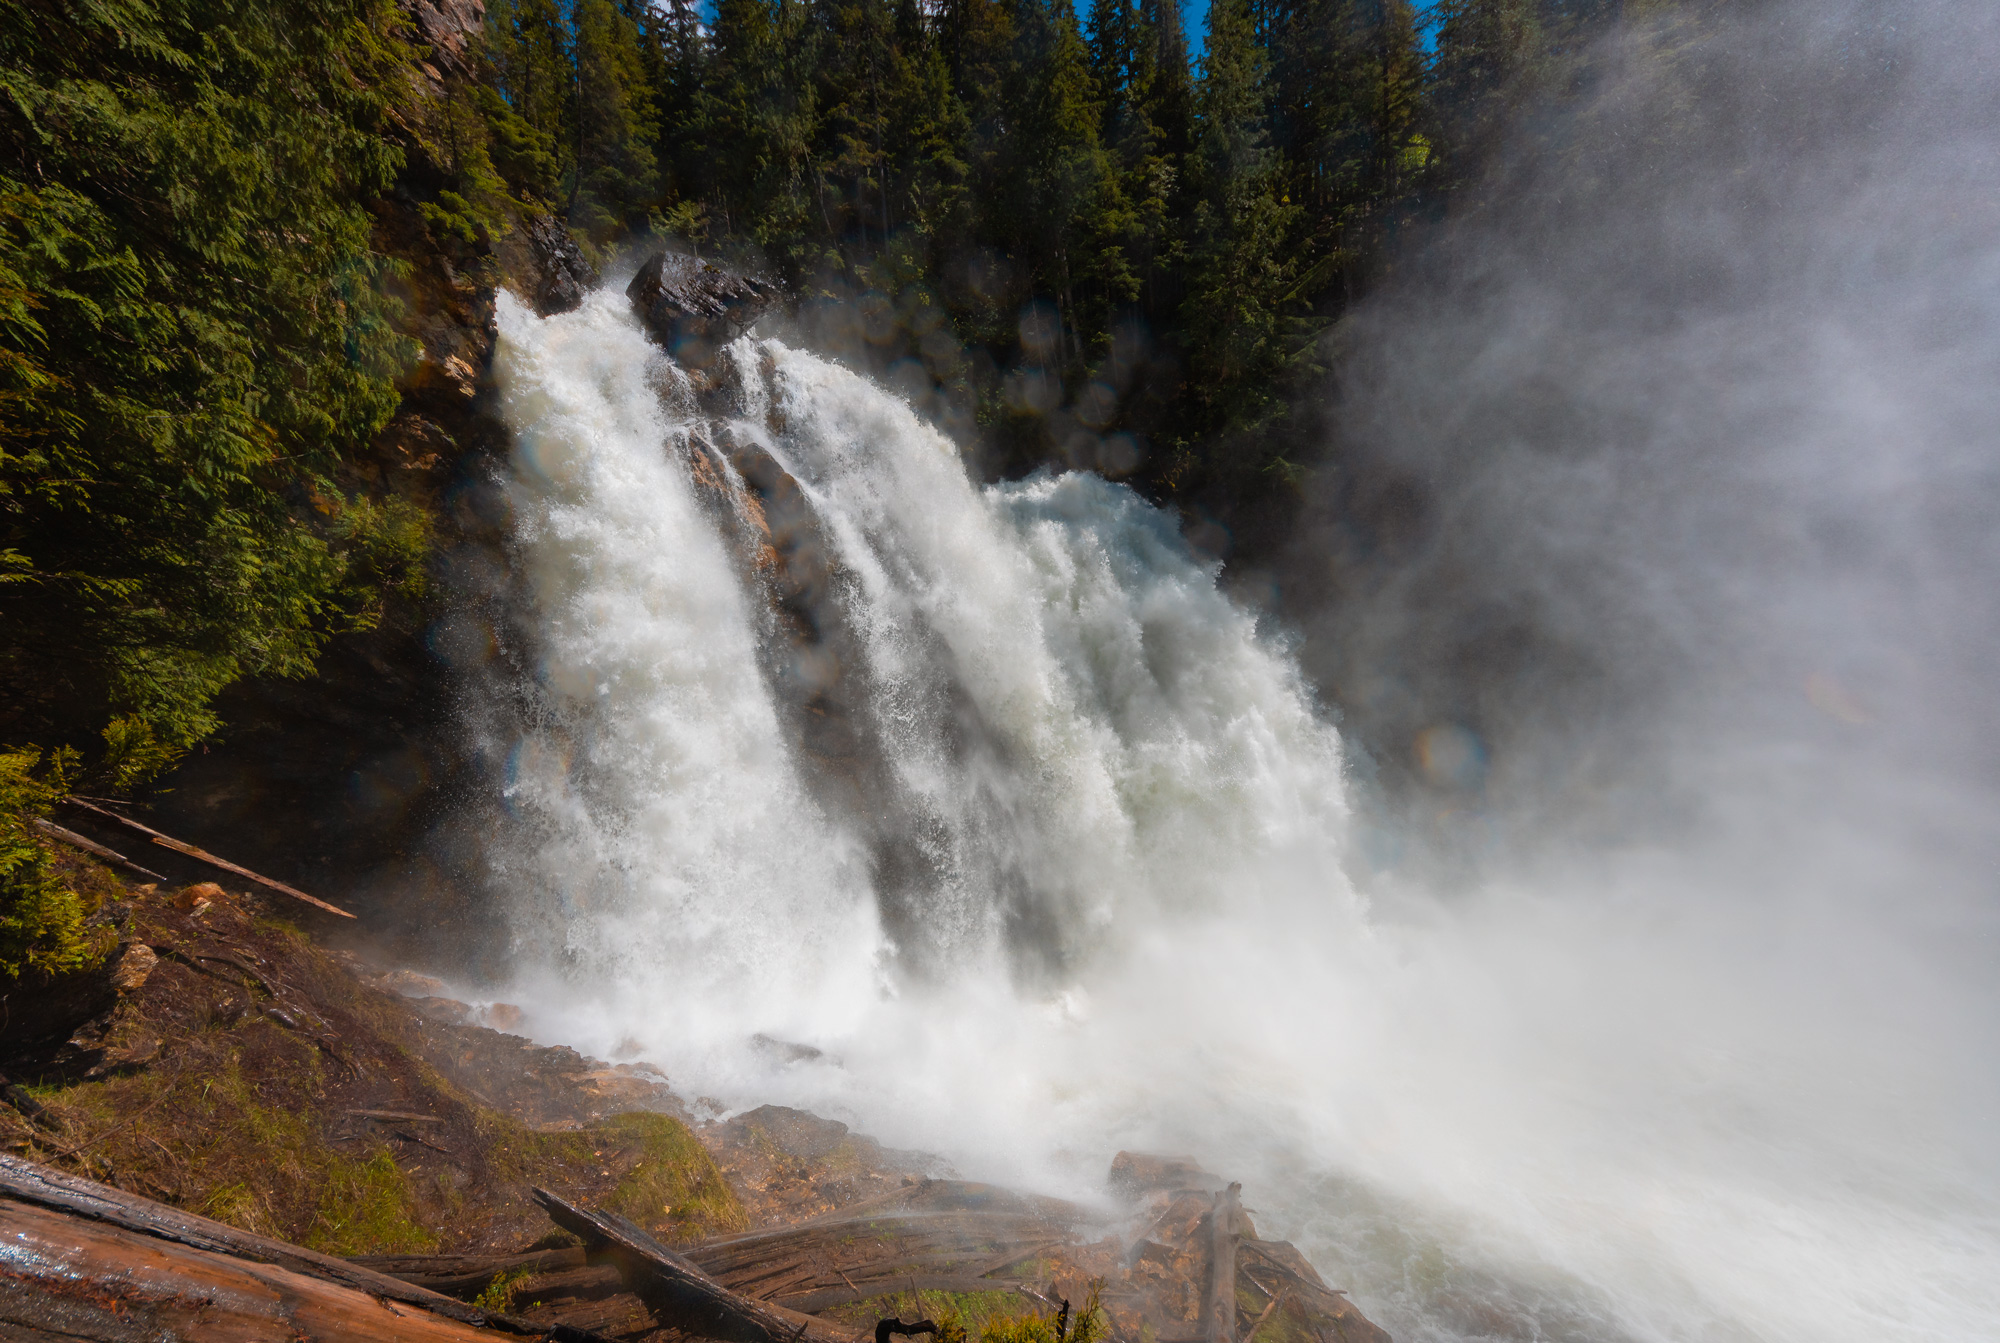 Trail Guide: Hiking Rainbow Falls in Monashee Provincial Park